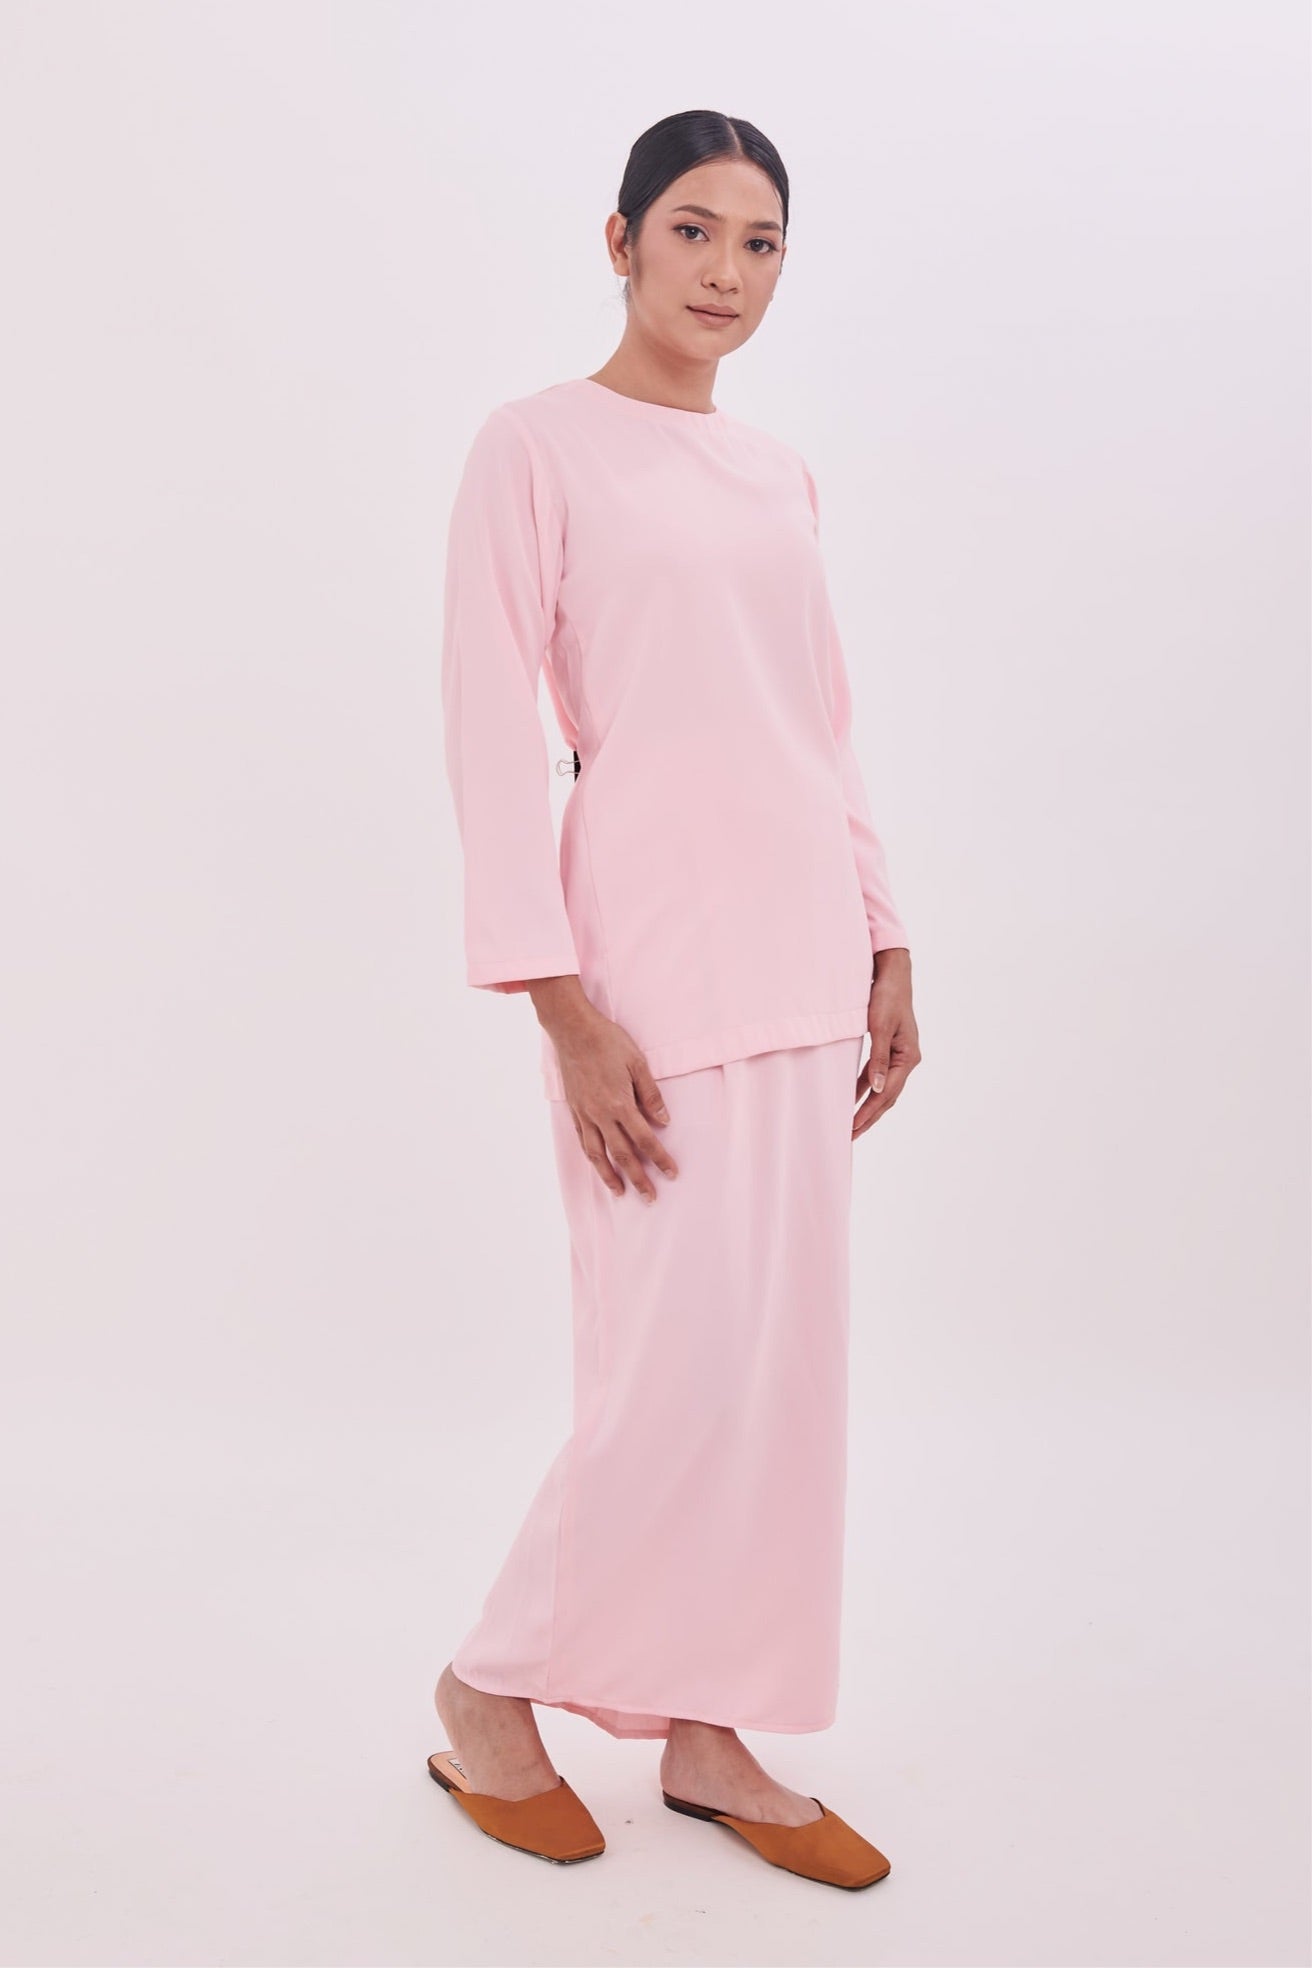 Edza Blouse in Pink